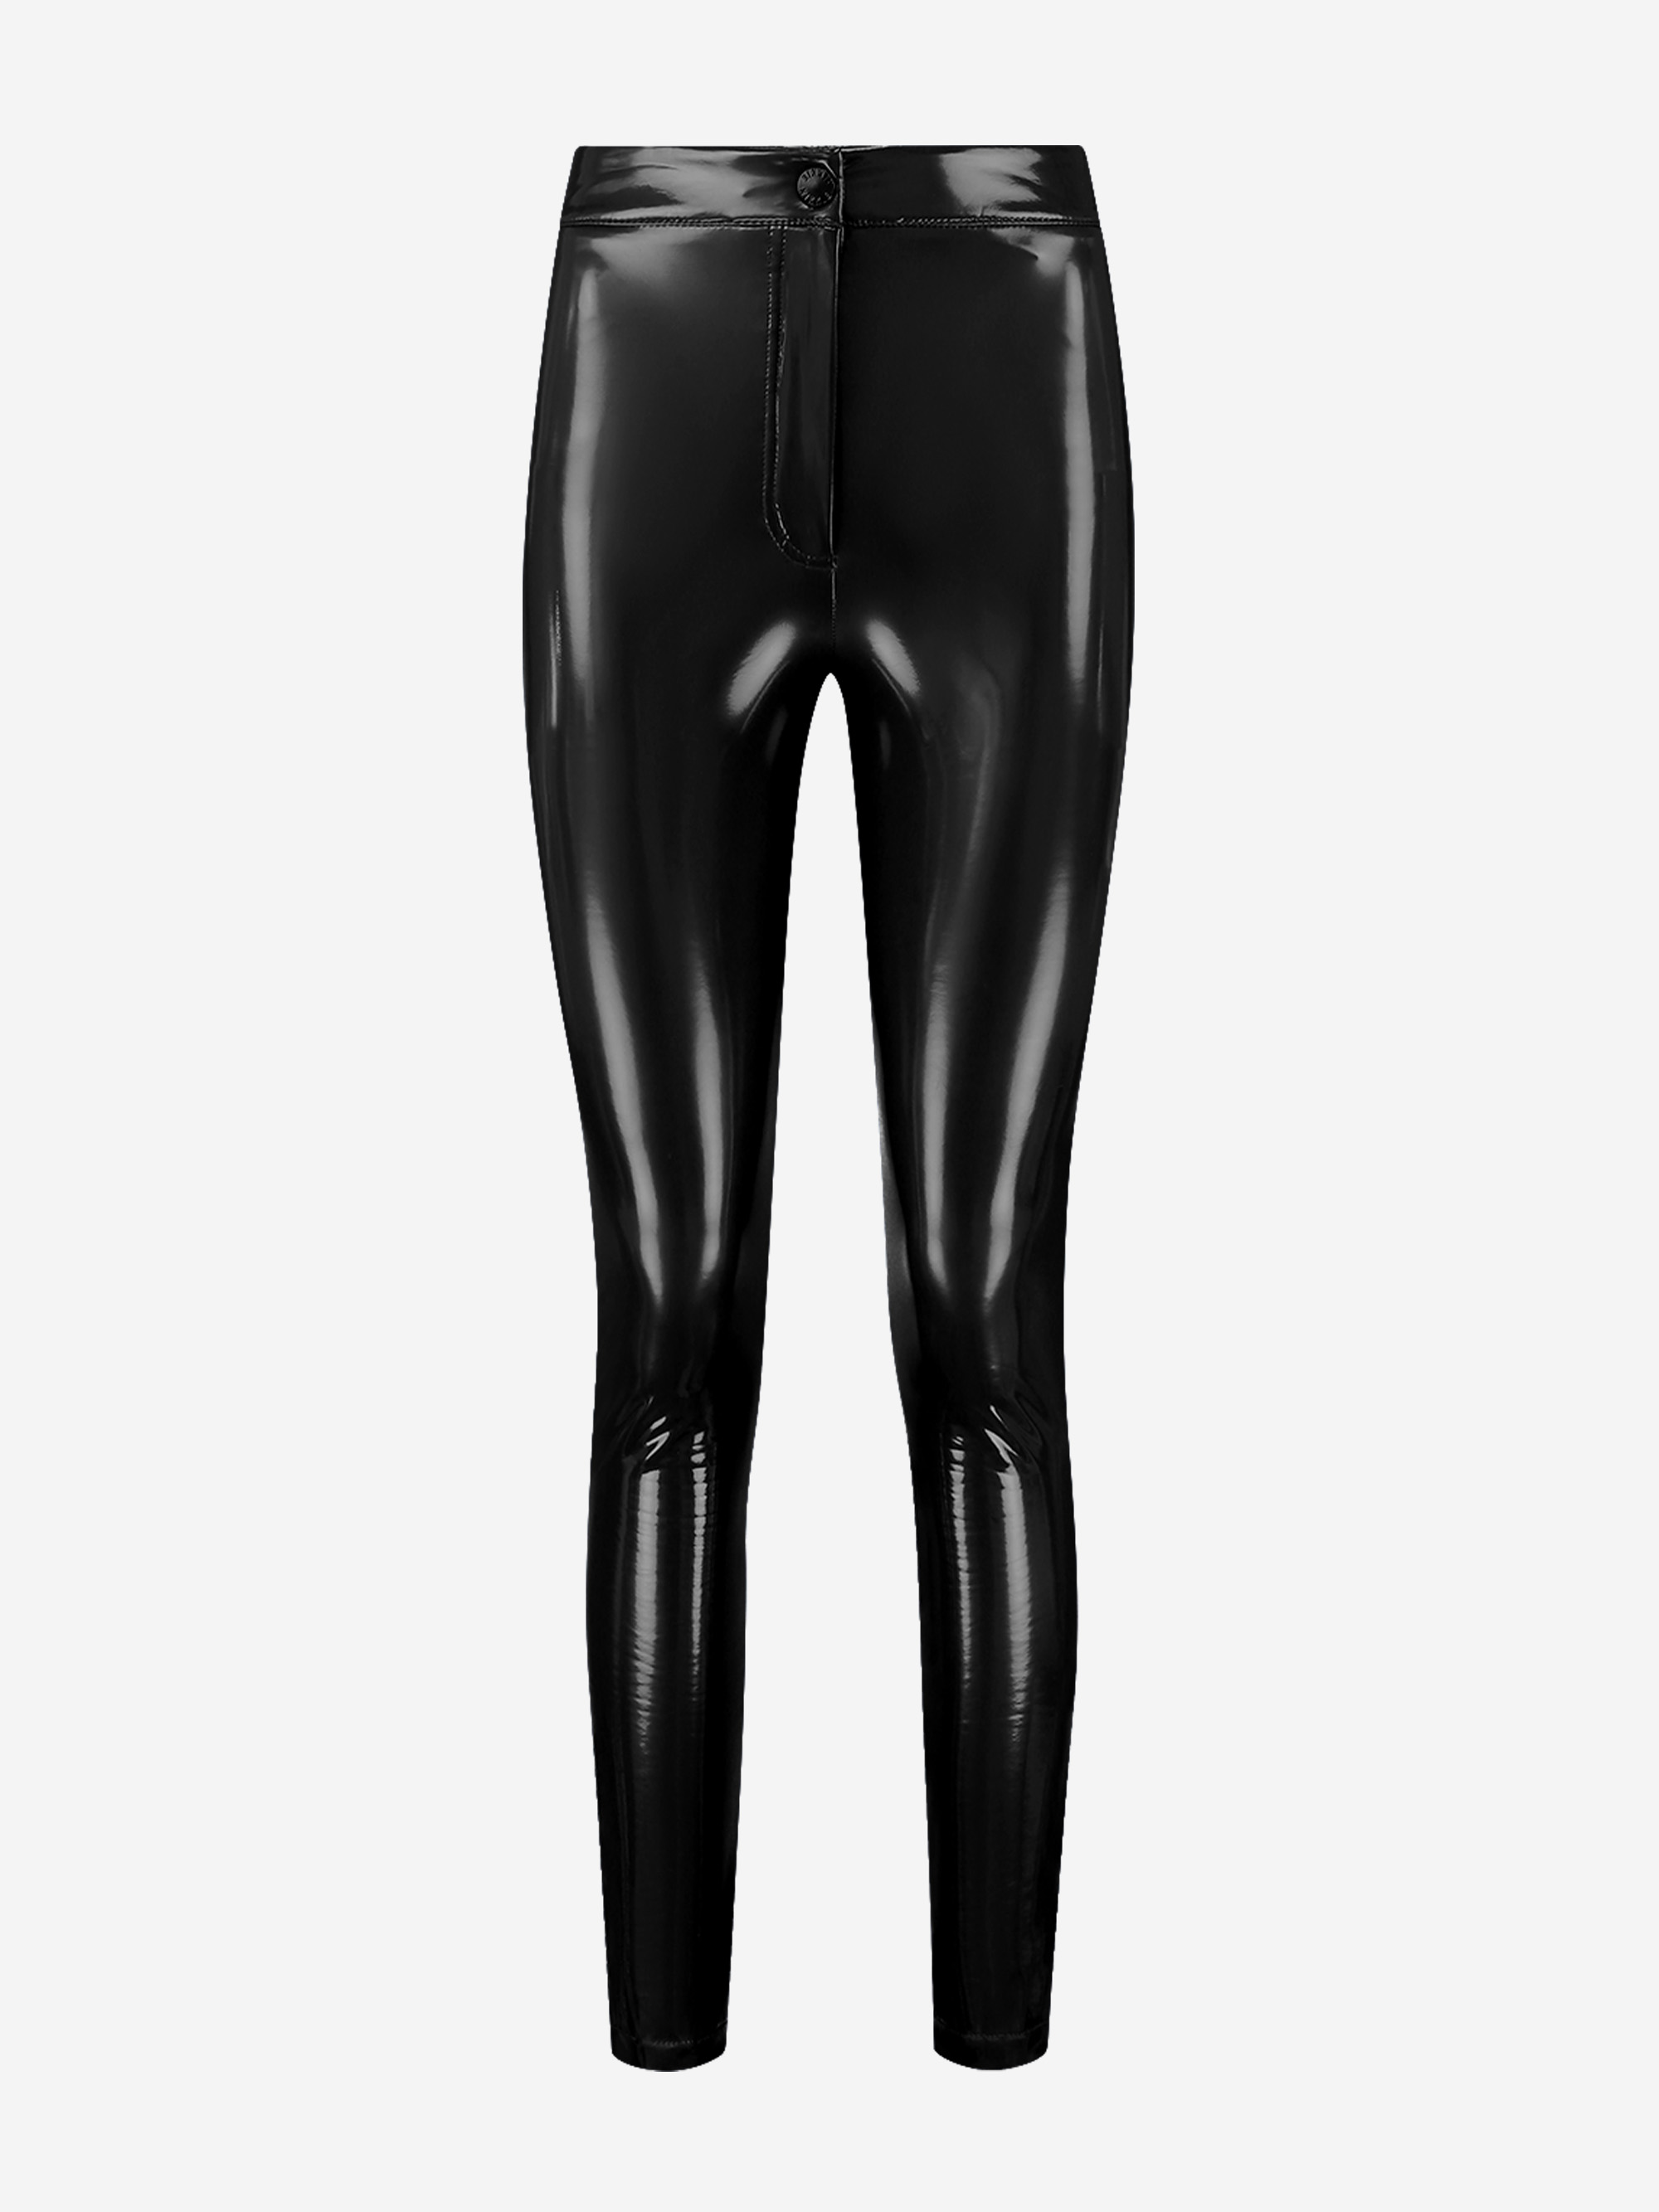 Skinny vinyl pants with mid rise